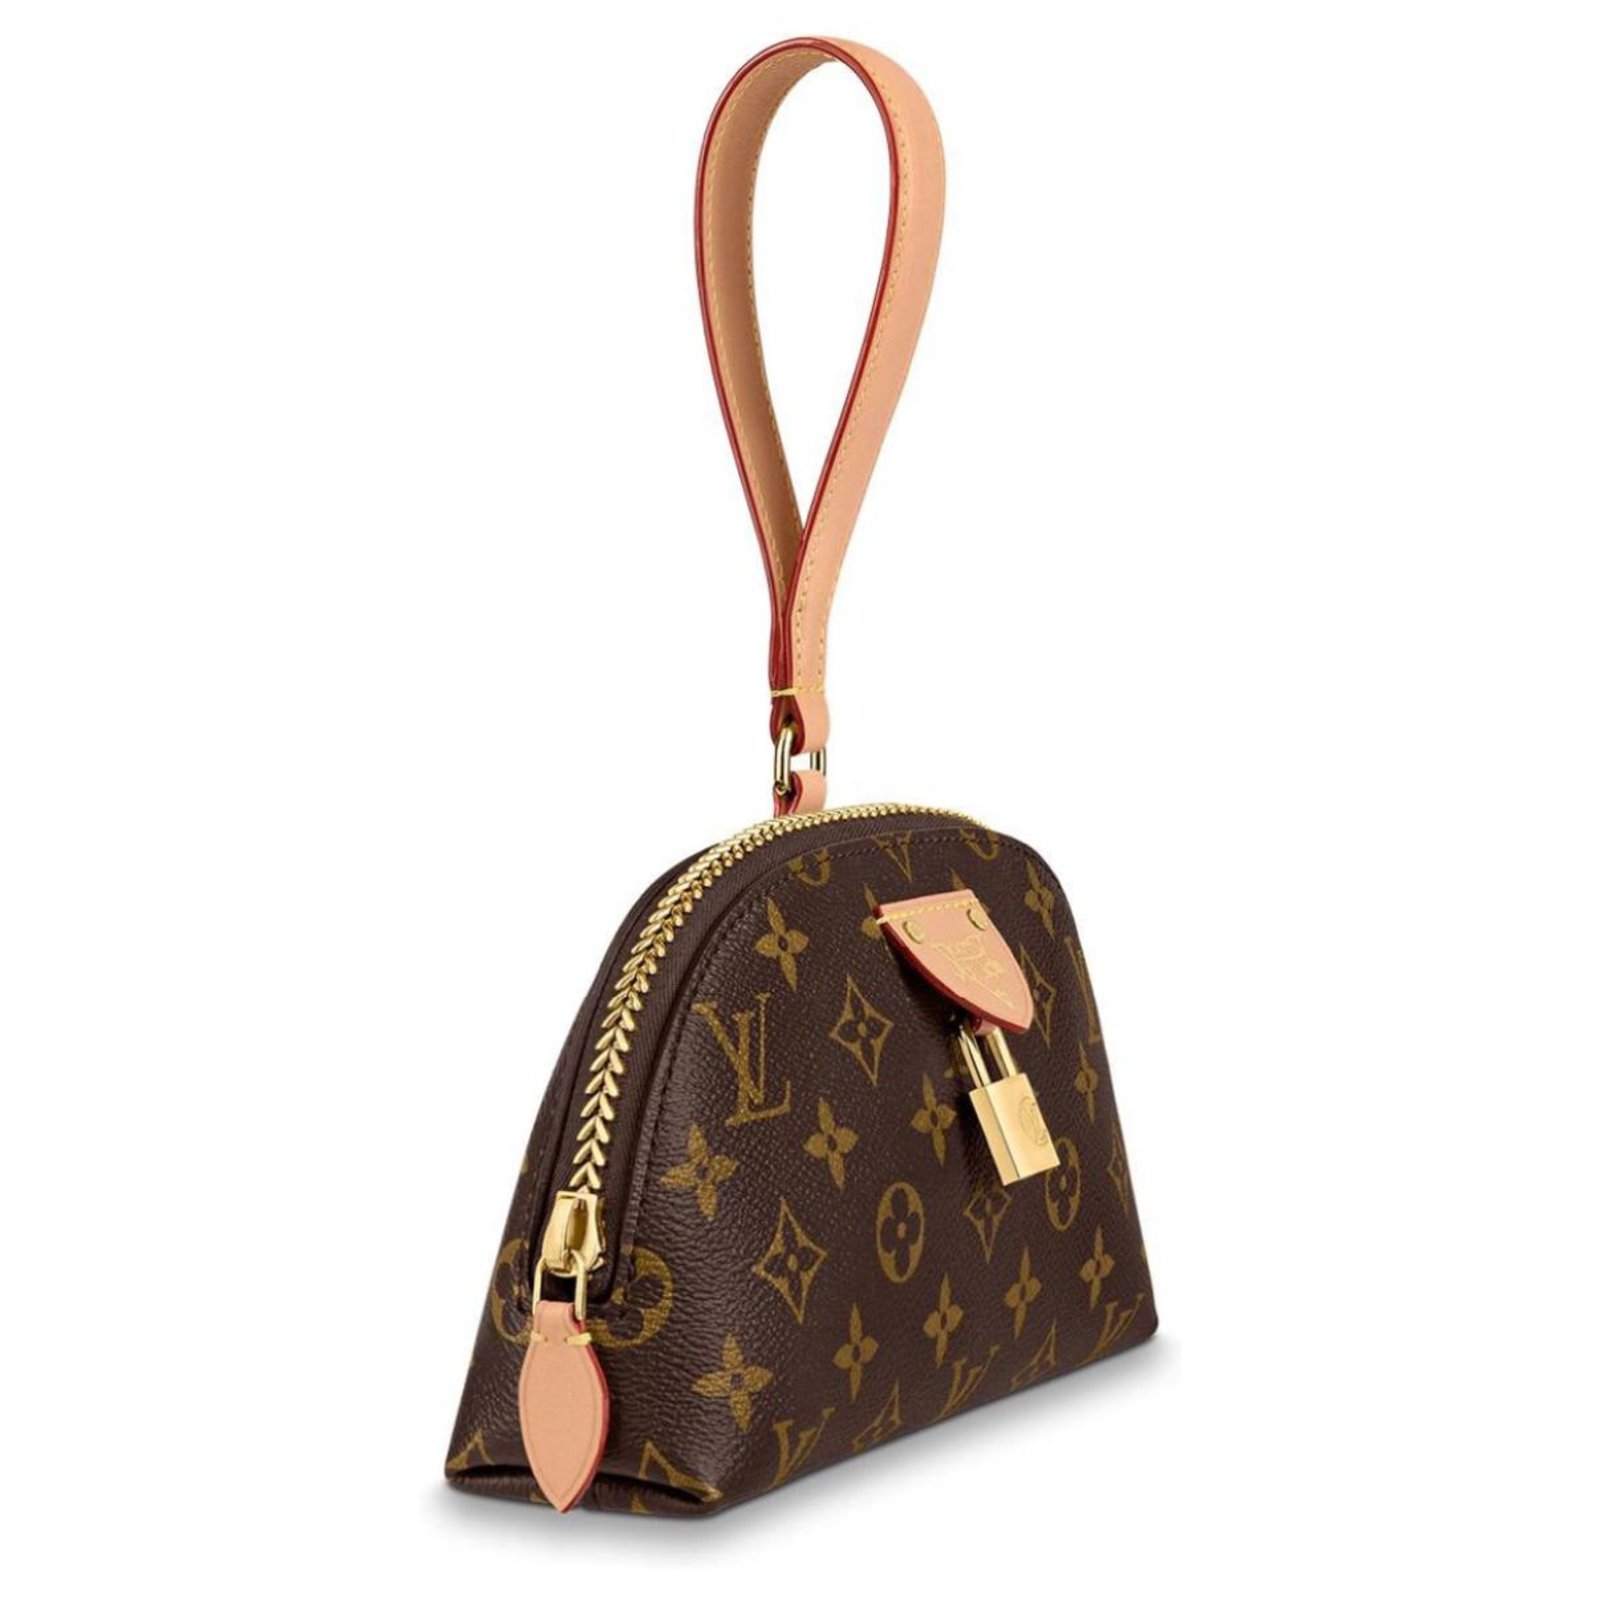 Moon pochette leather handbag Louis Vuitton Brown in Leather